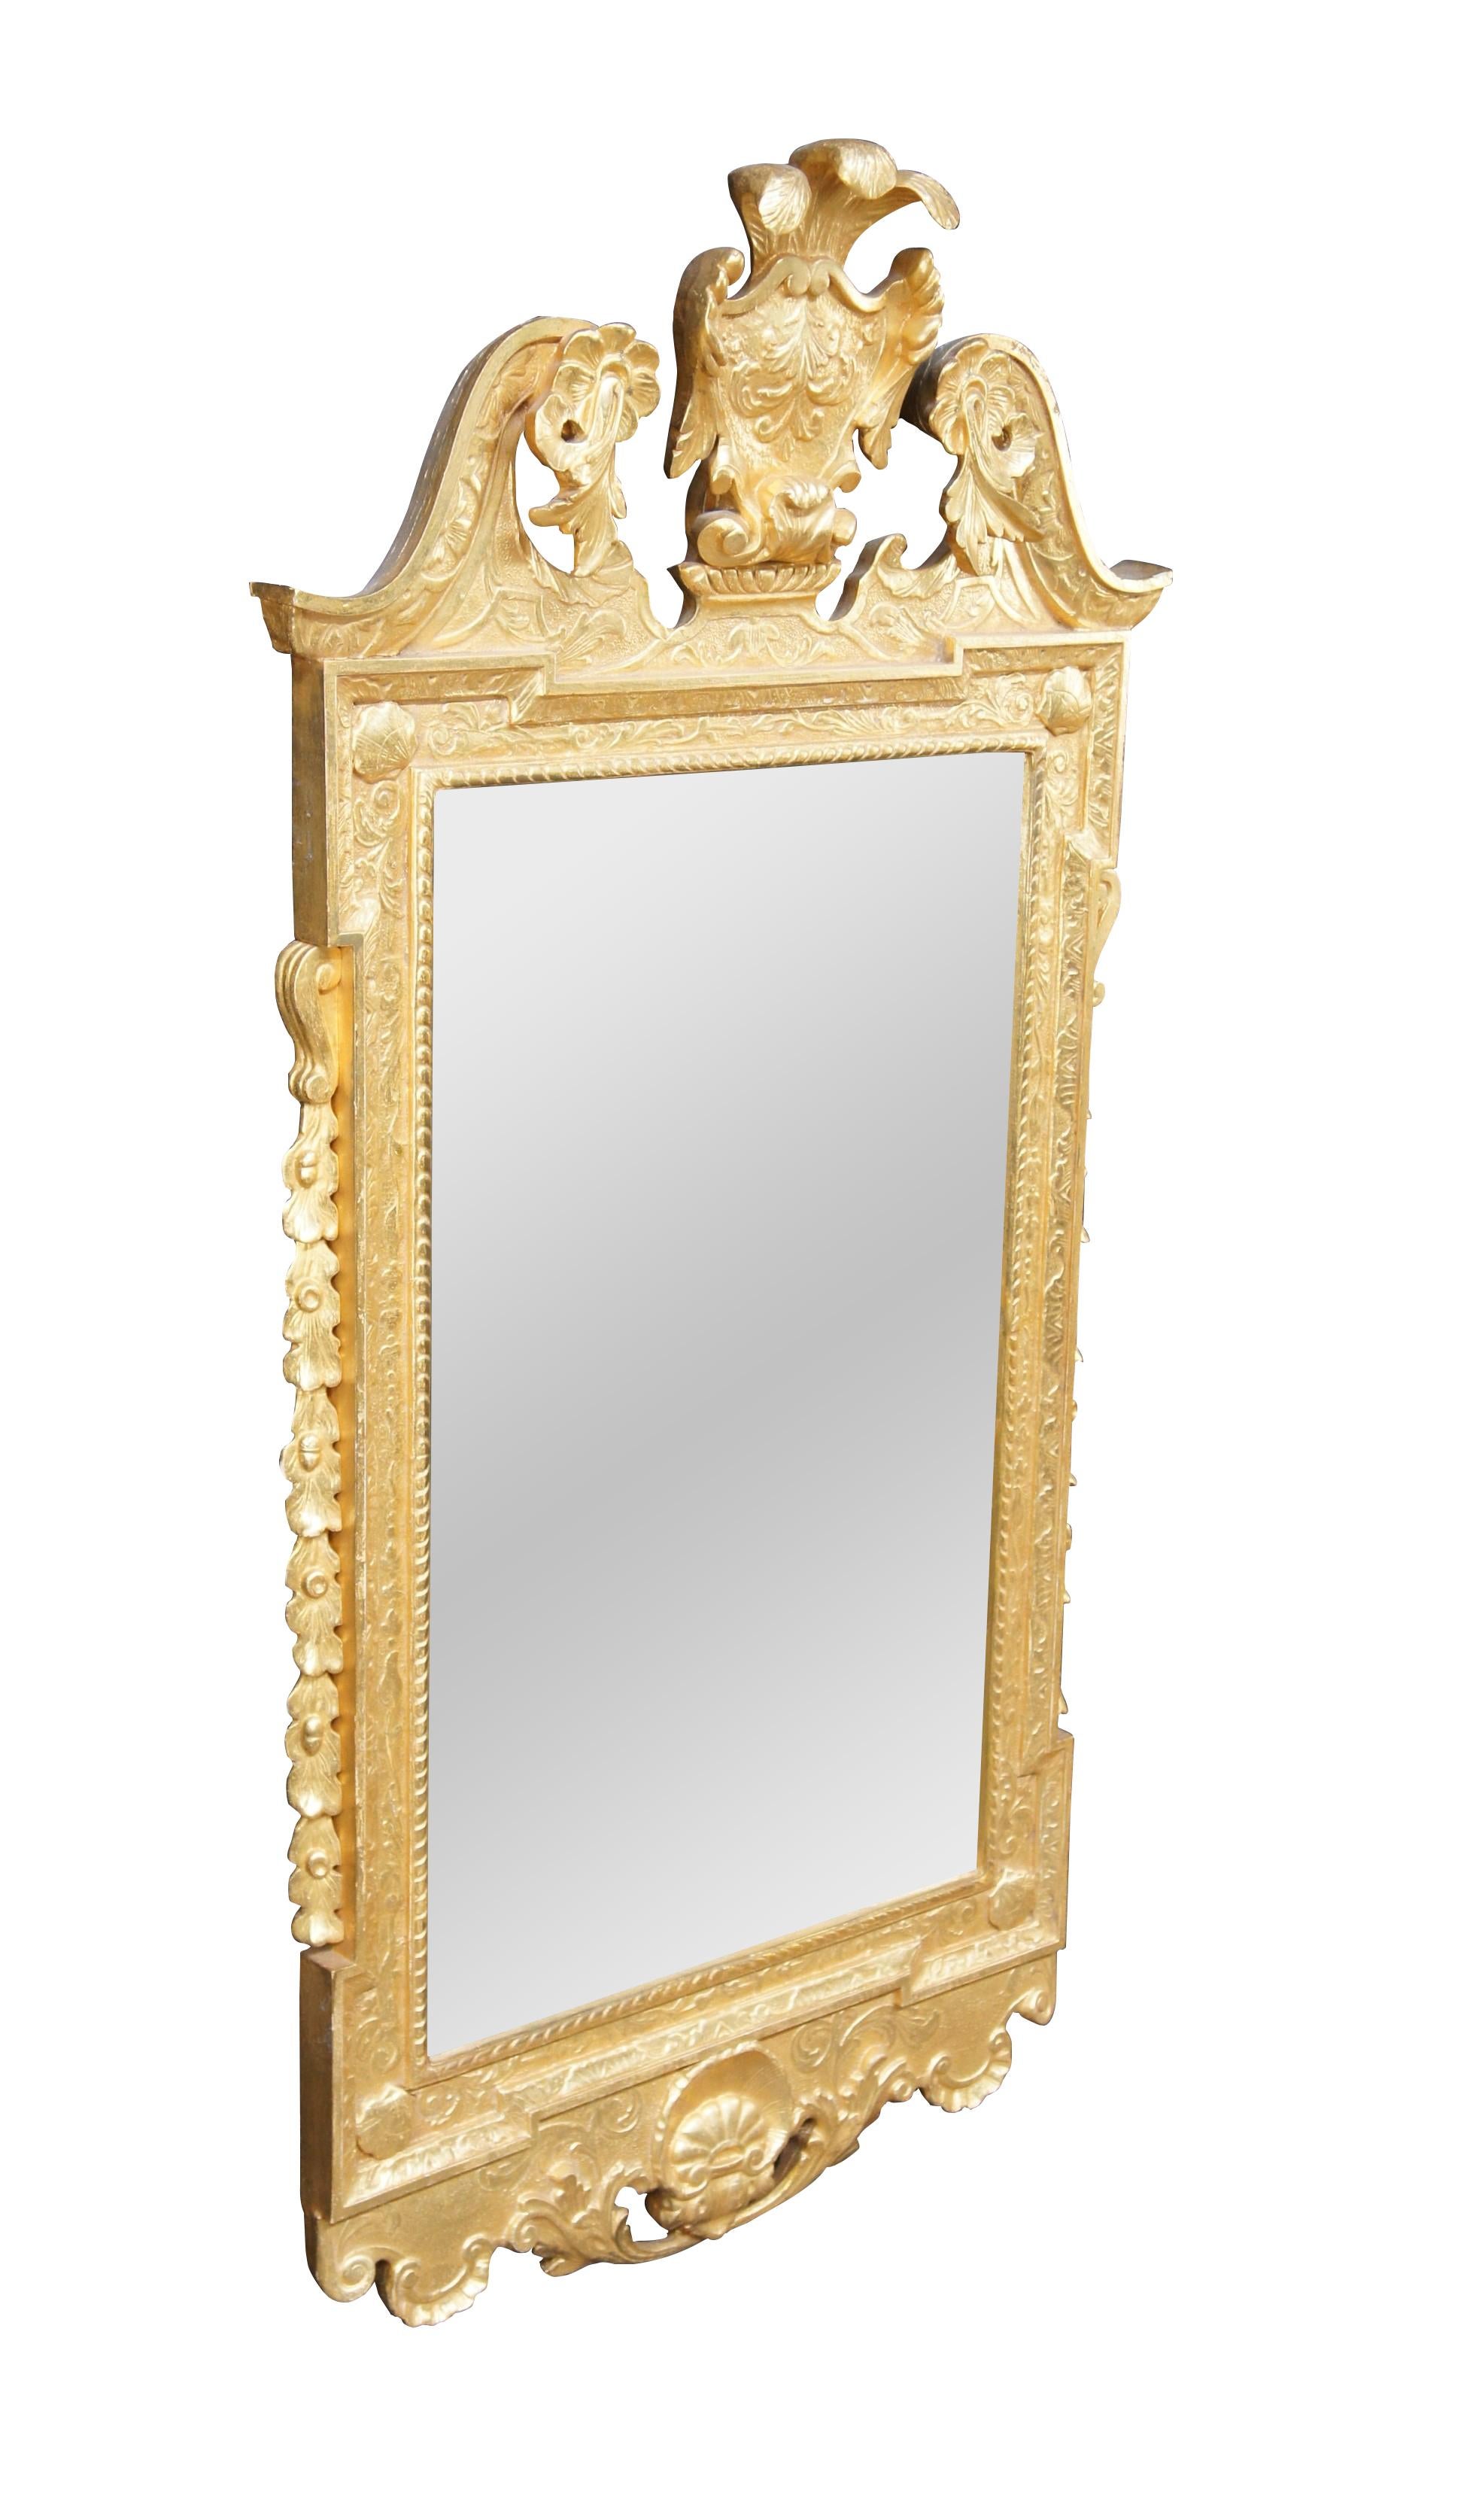 Kittinger Colonial Williamsburg George I / Chippendale Gold Leaf looking glass Mirror, CW-LG 6, circa 1984.   Reproduced from the original which currently hangs in Wetherburn's Tavern in Williamsburg, Virginia.  An elegant mirror with beveled glass